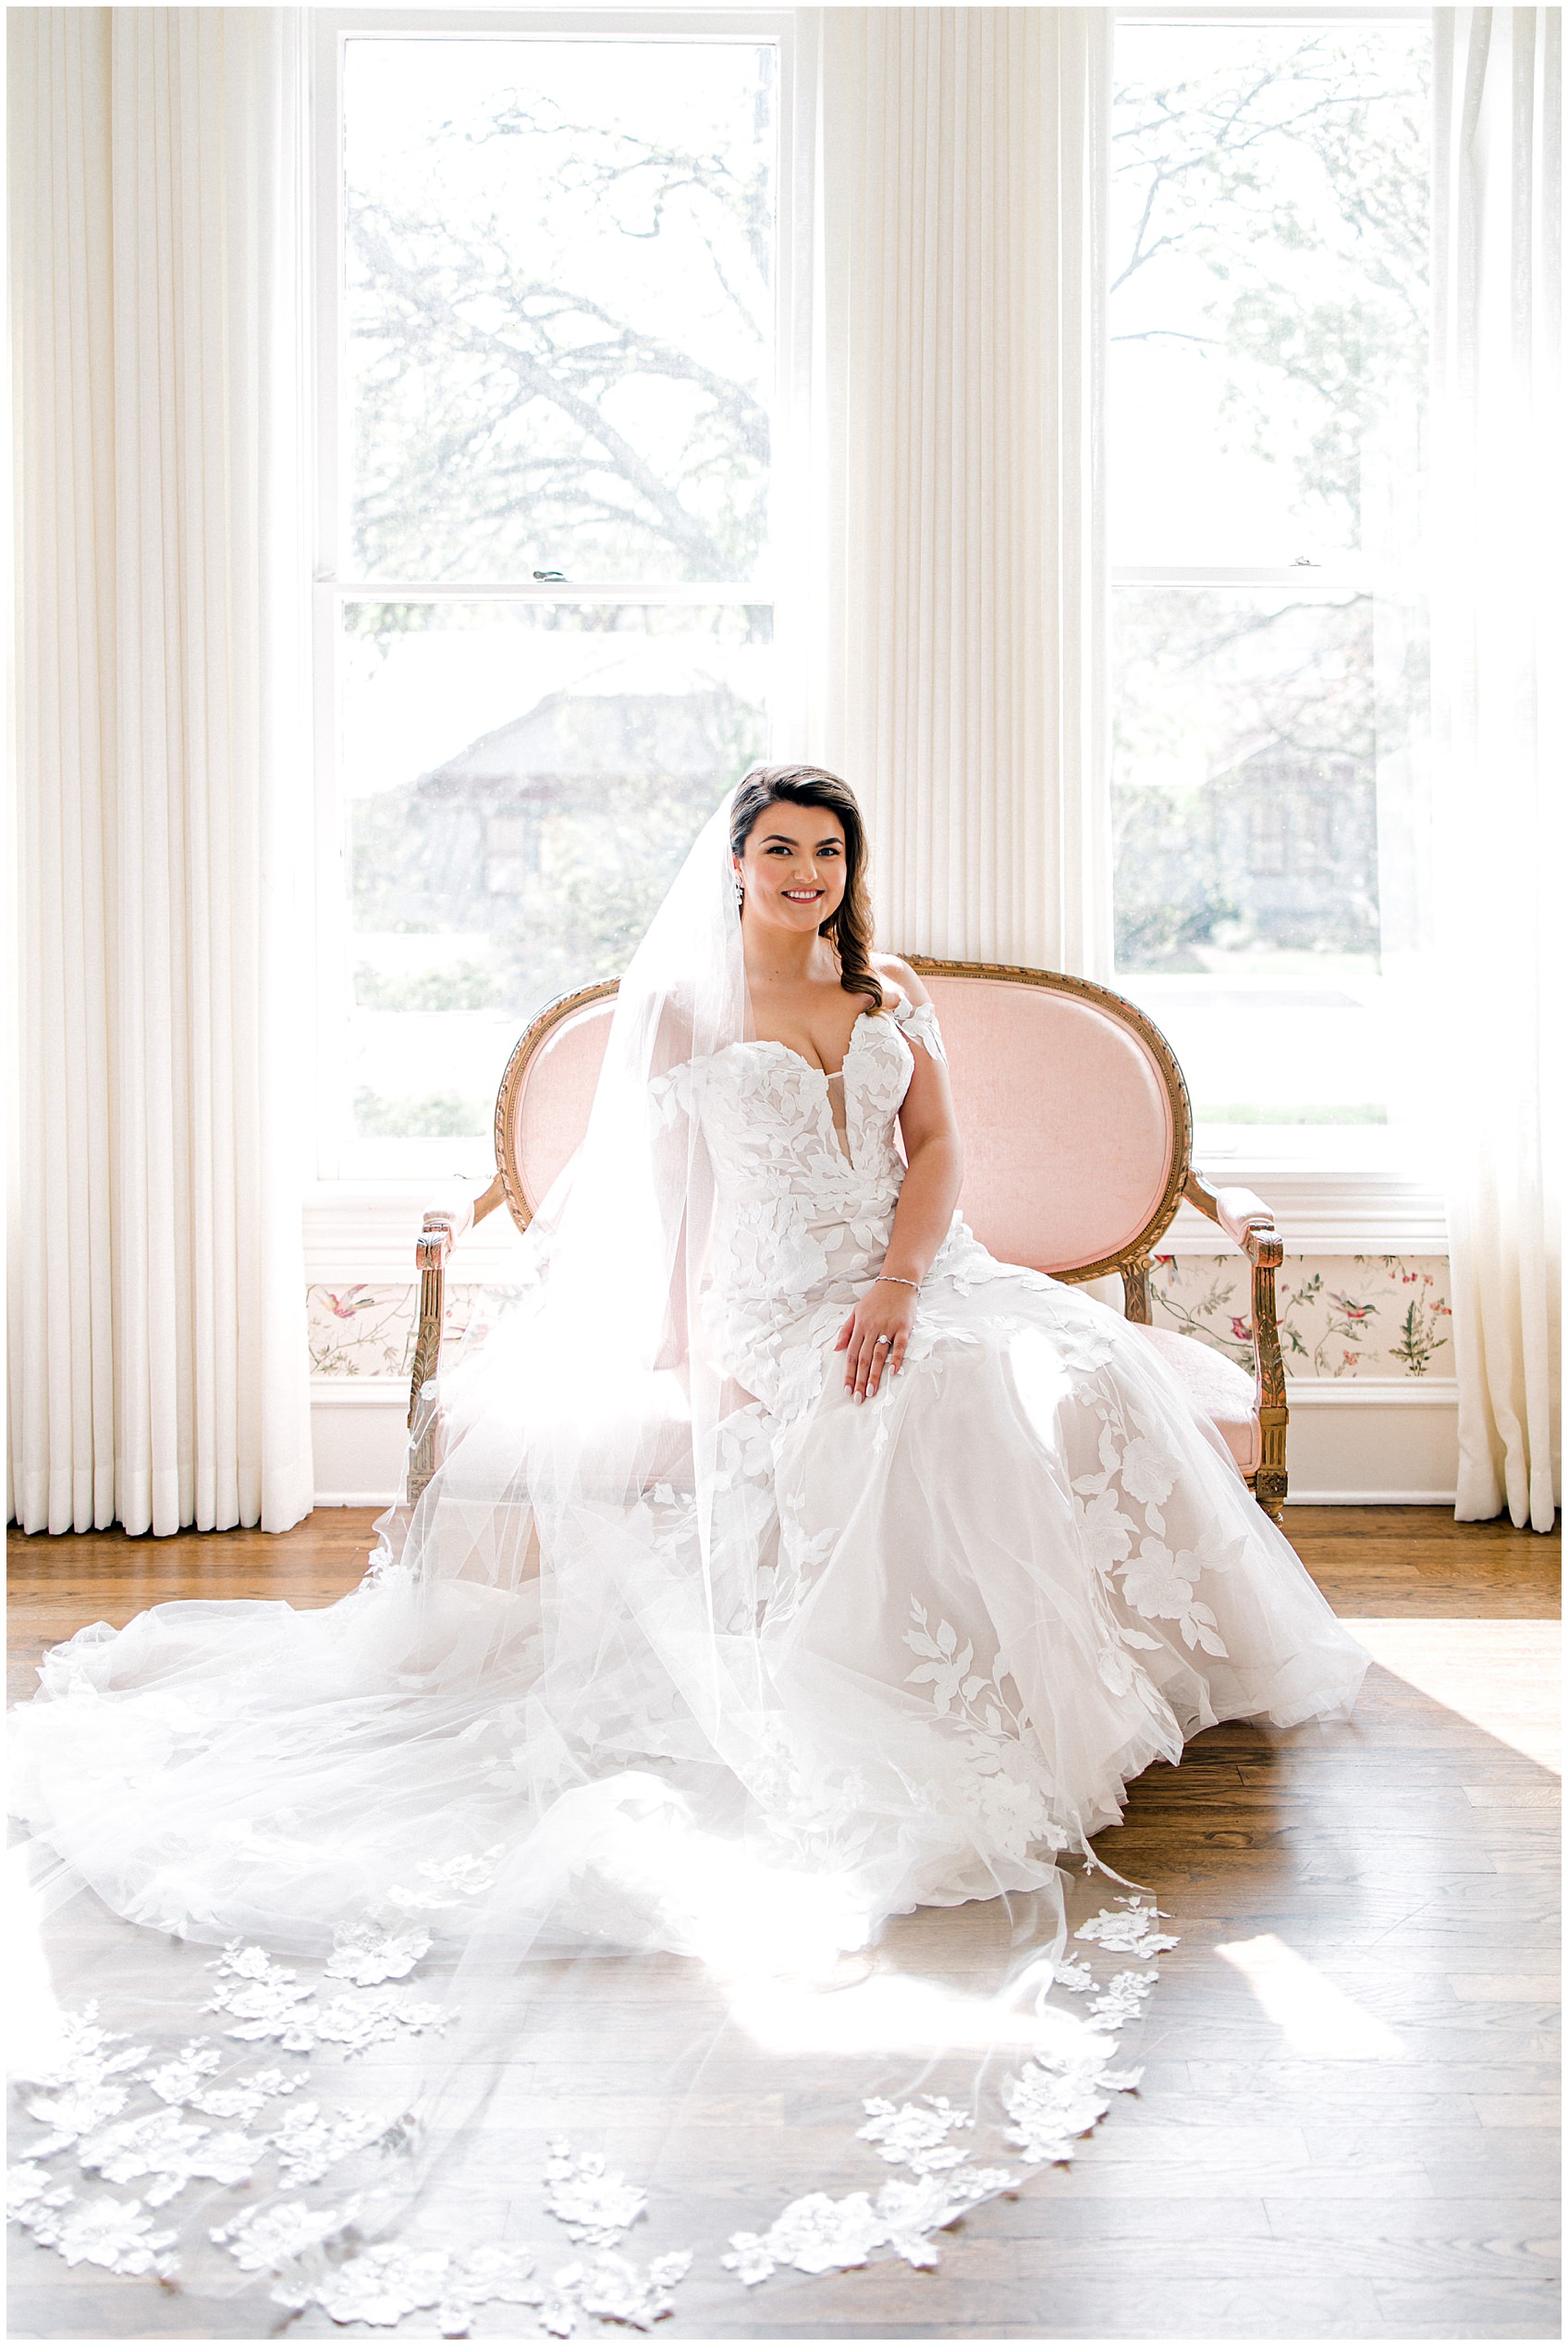 Woodbine Mansion Spring Bridal wedding Photos by Allison Jeffers Photography 0031